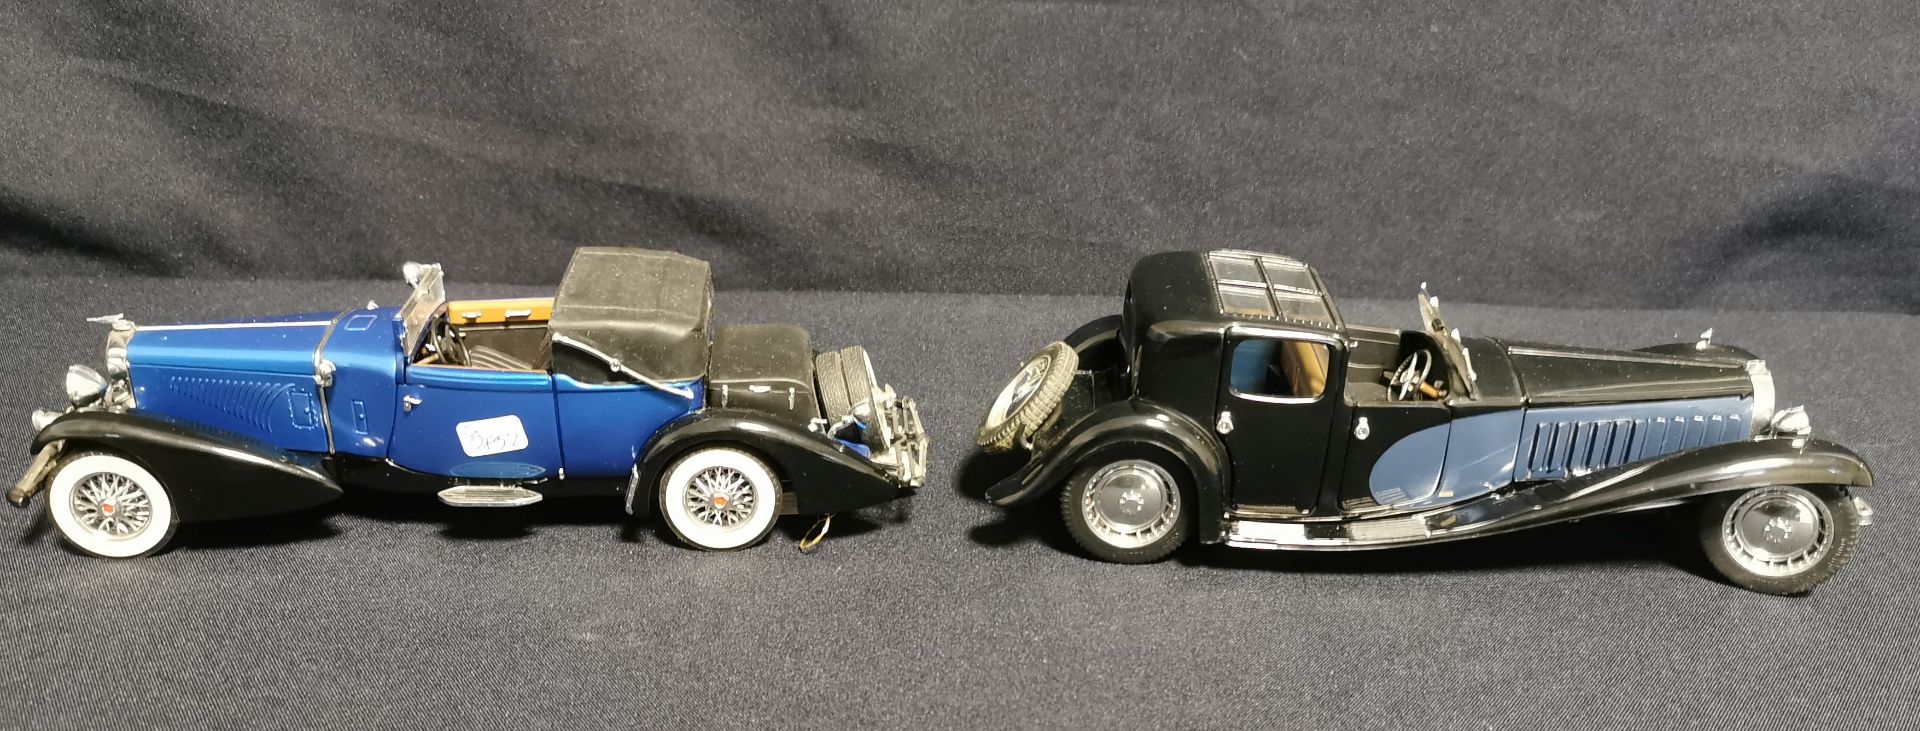 TIN TOY CARS - Image 4 of 5